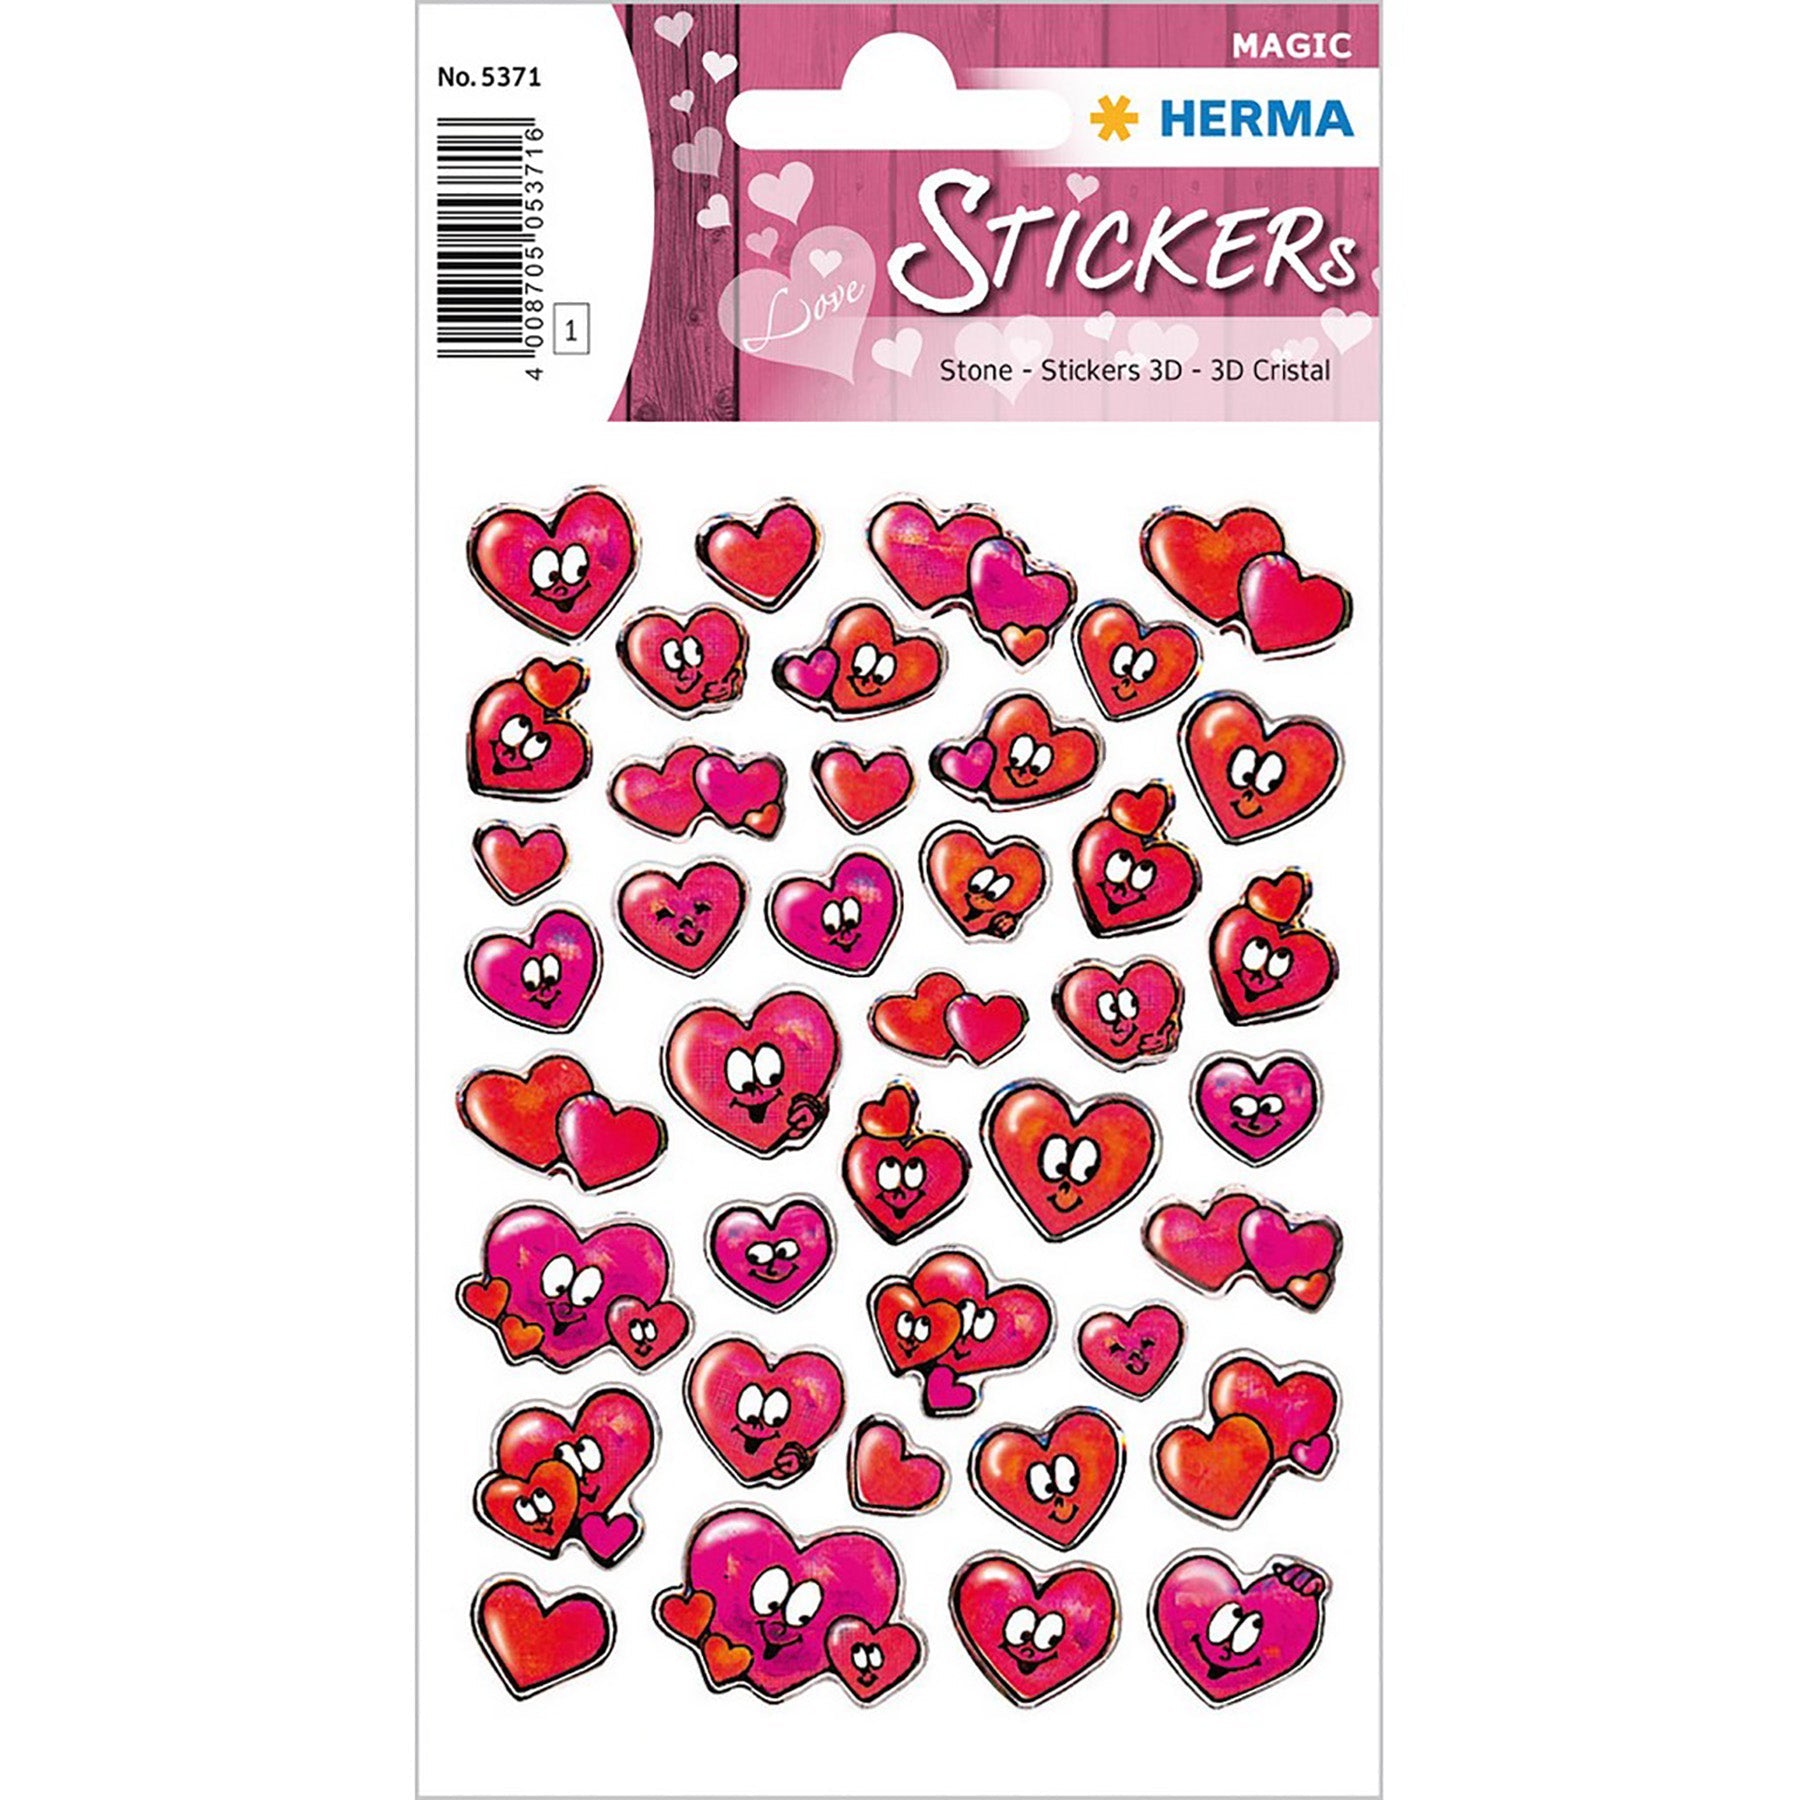 Herma Magic Stickers Hearts 3D Crystal 4.75x3.1in Sheet